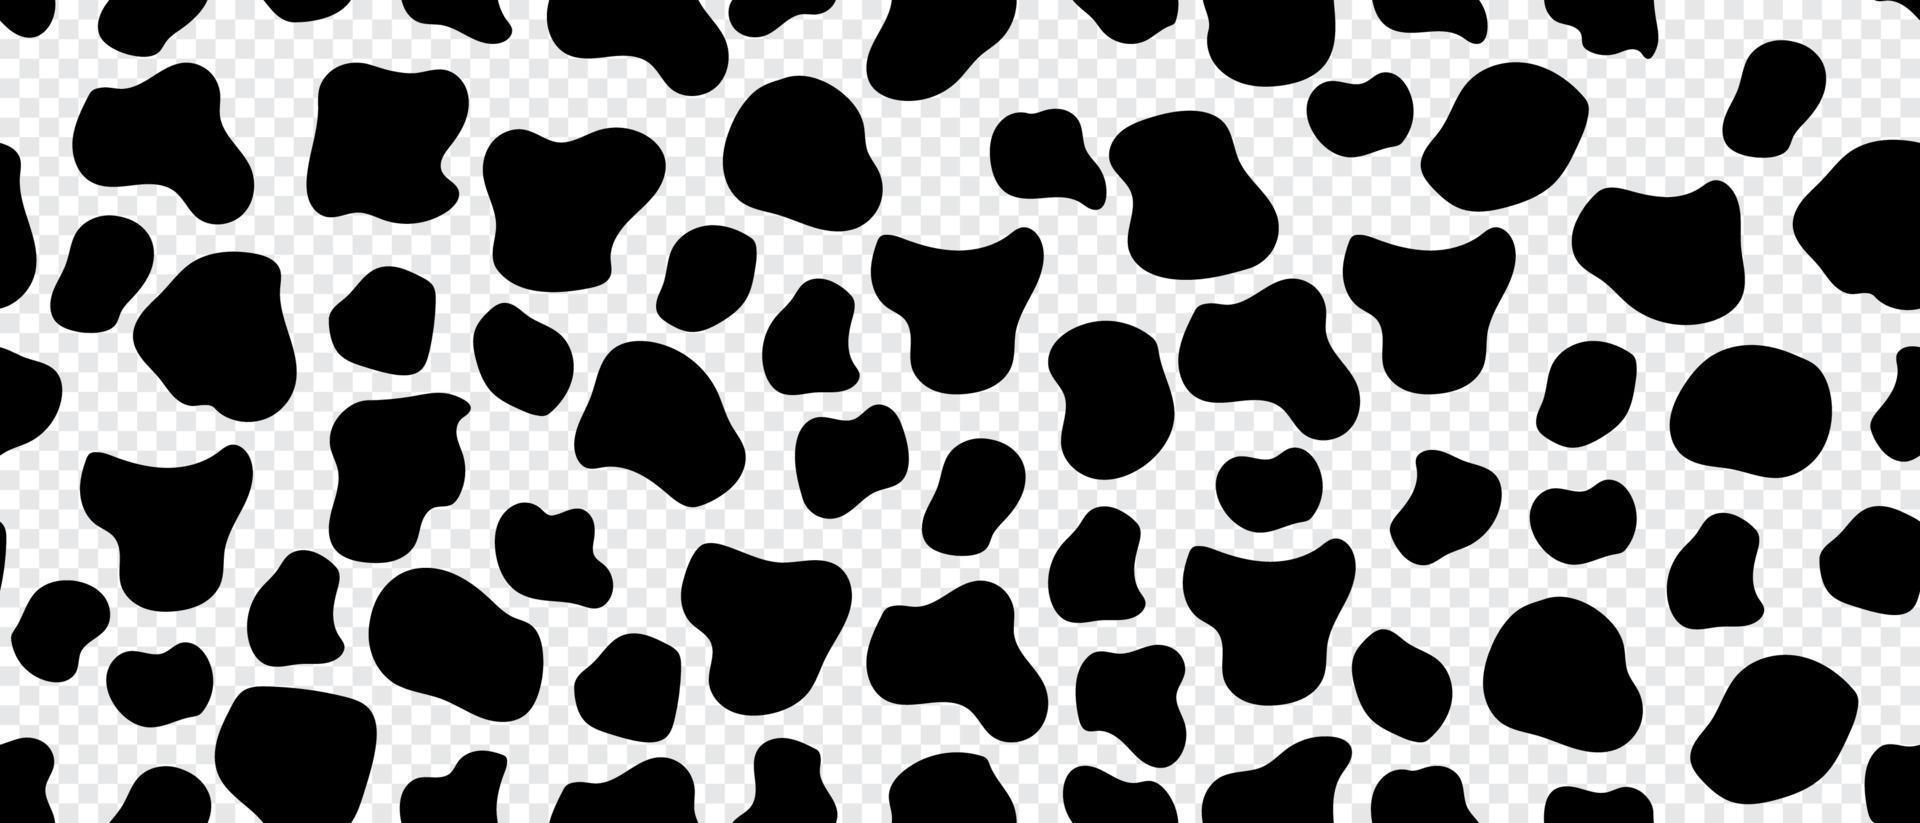 Abstract blob seamless vector repeat pattern design. Abstract blobs seamless background. Geometric Seamless pattern. Random black blotch. Vector illustration